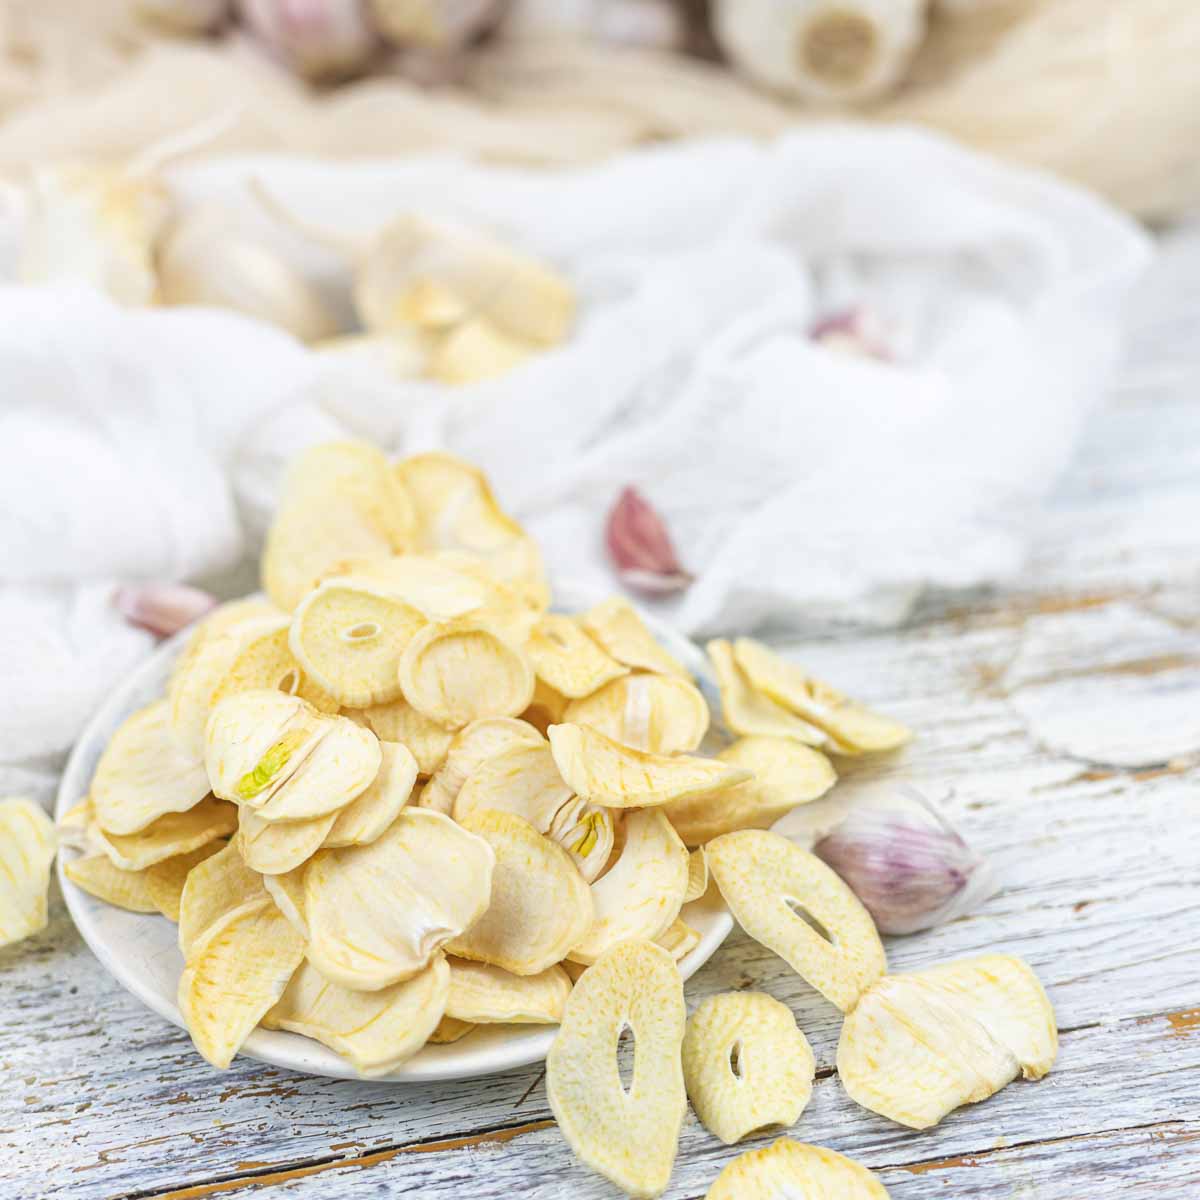 Garlic chips in a white bowl on a wooden table.